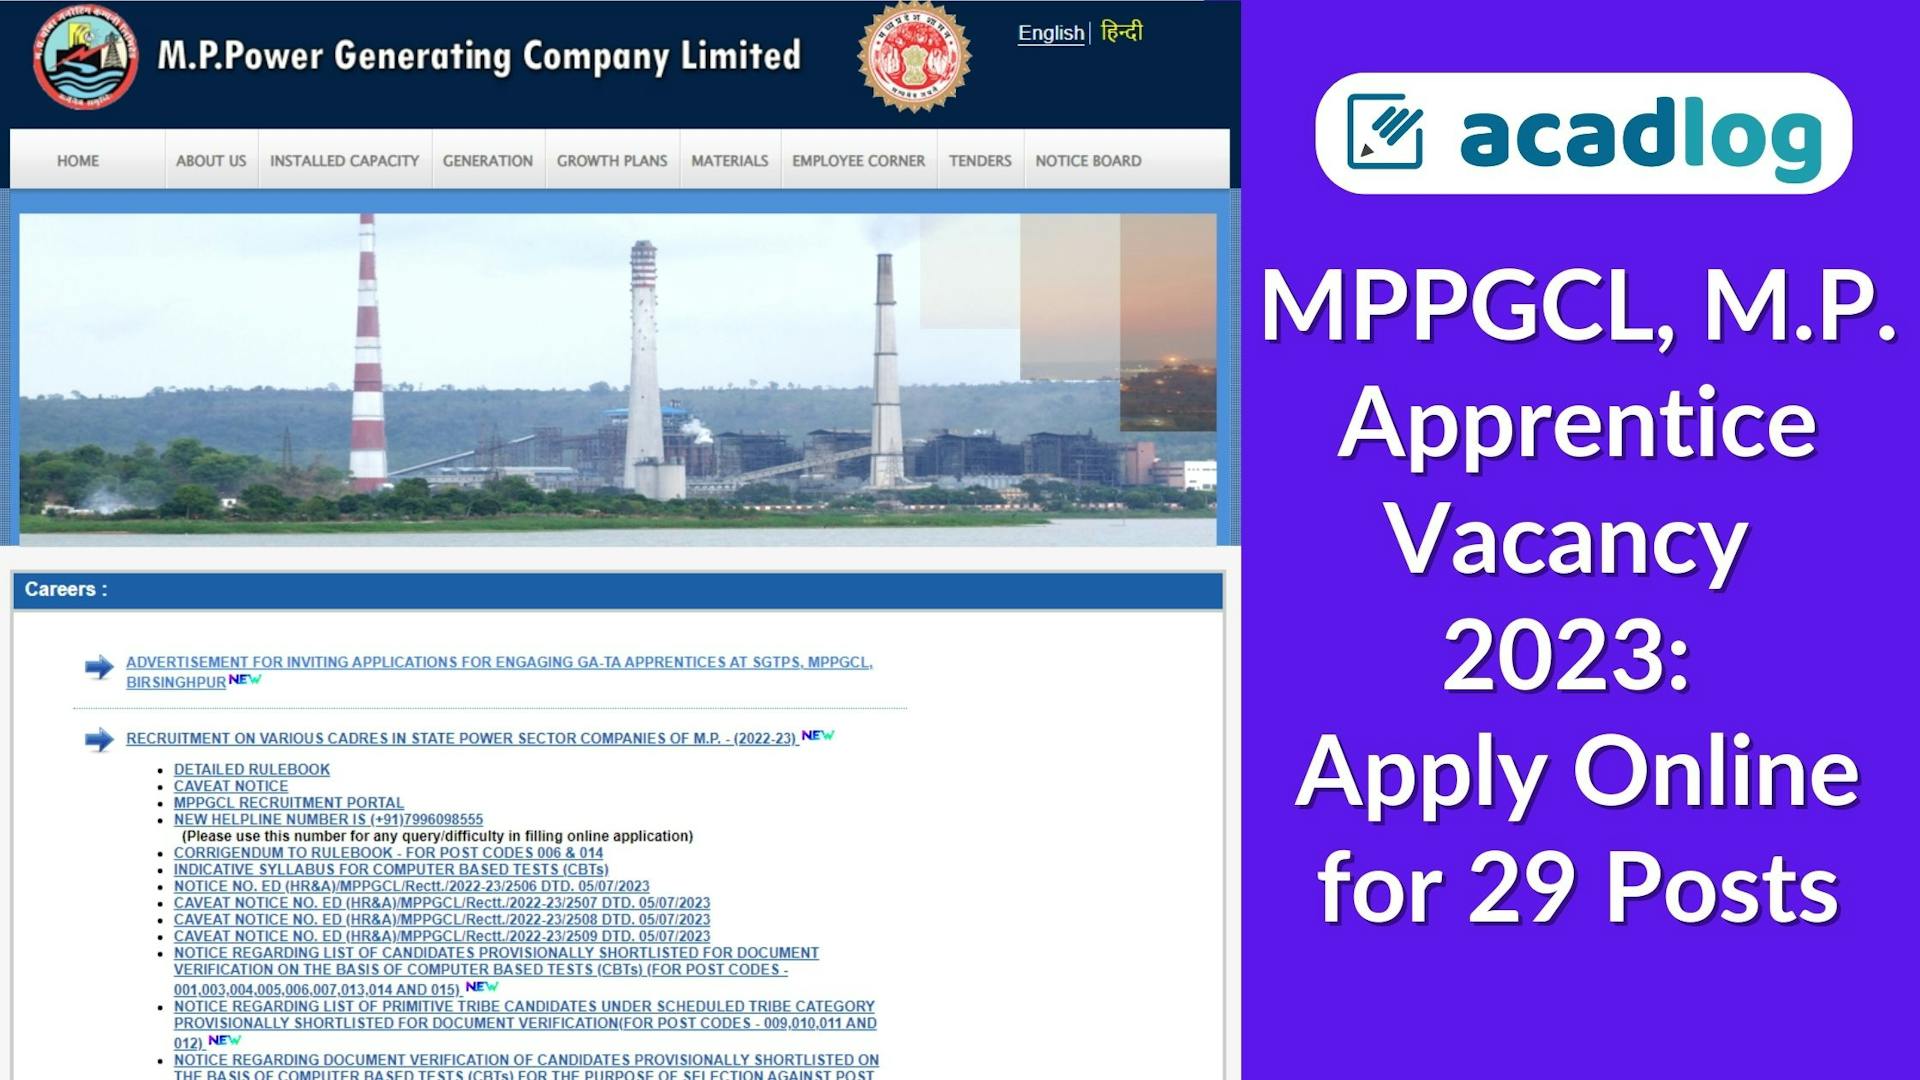 MPPGCL Apprentice Vacancy 2023: Apply Online for 29 Posts